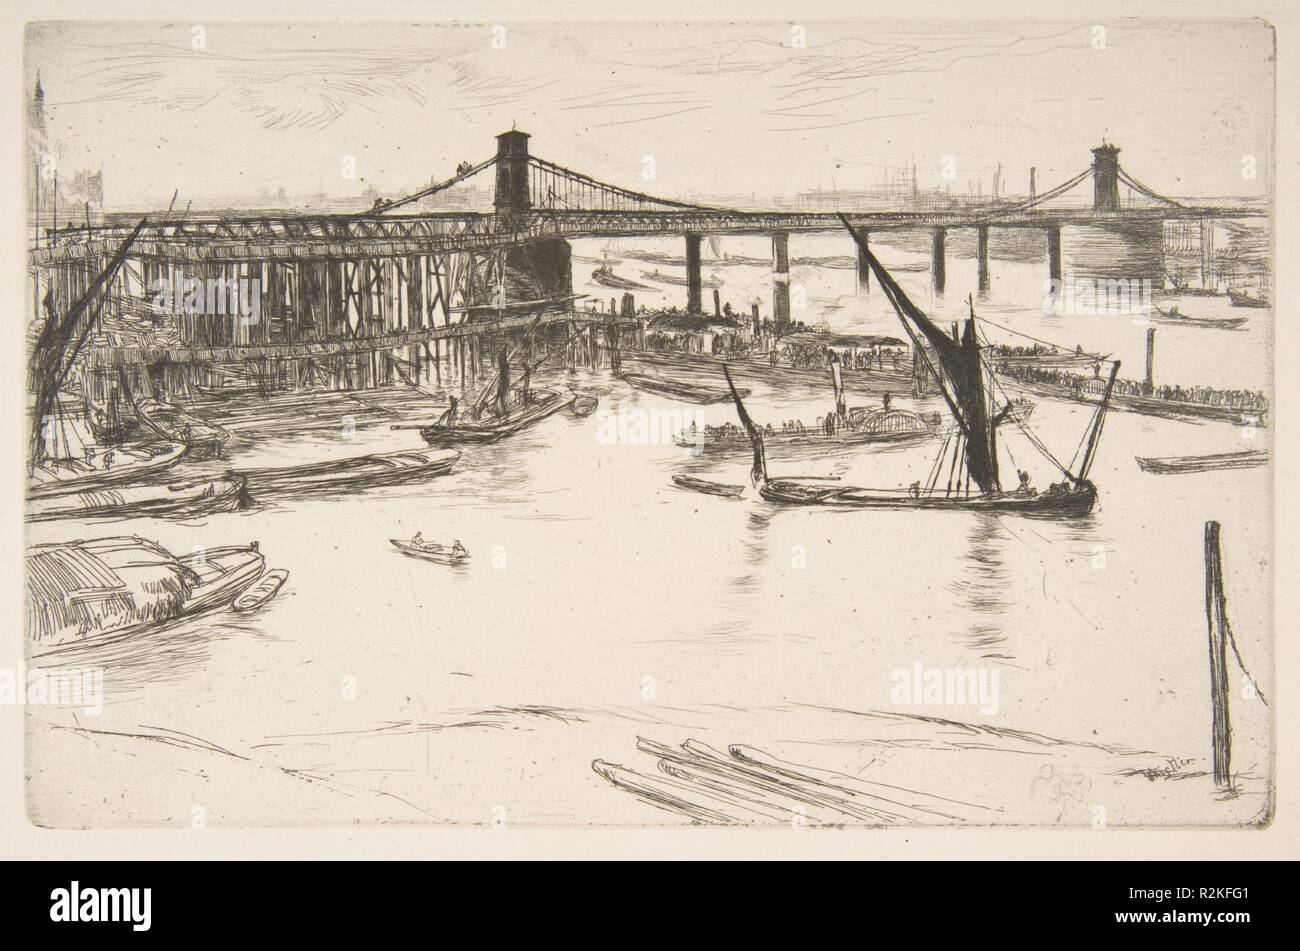 Old Hungerford Bridge. Artist: James McNeill Whistler (American, Lowell, Massachusetts 1834-1903 London). Dimensions: plate: 5 3/8 x 8 1/4 in. (13.7 x 21 cm)  sheet: 8 1/4 x 12 5/8 in. (21 x 32.1 cm). Series/Portfolio: Thames Set ('A Series of Sixteen Etchings of Scenes on the Thames and Other Subjects' 1871). Date: 1861. Museum: Metropolitan Museum of Art, New York, USA. Stock Photo